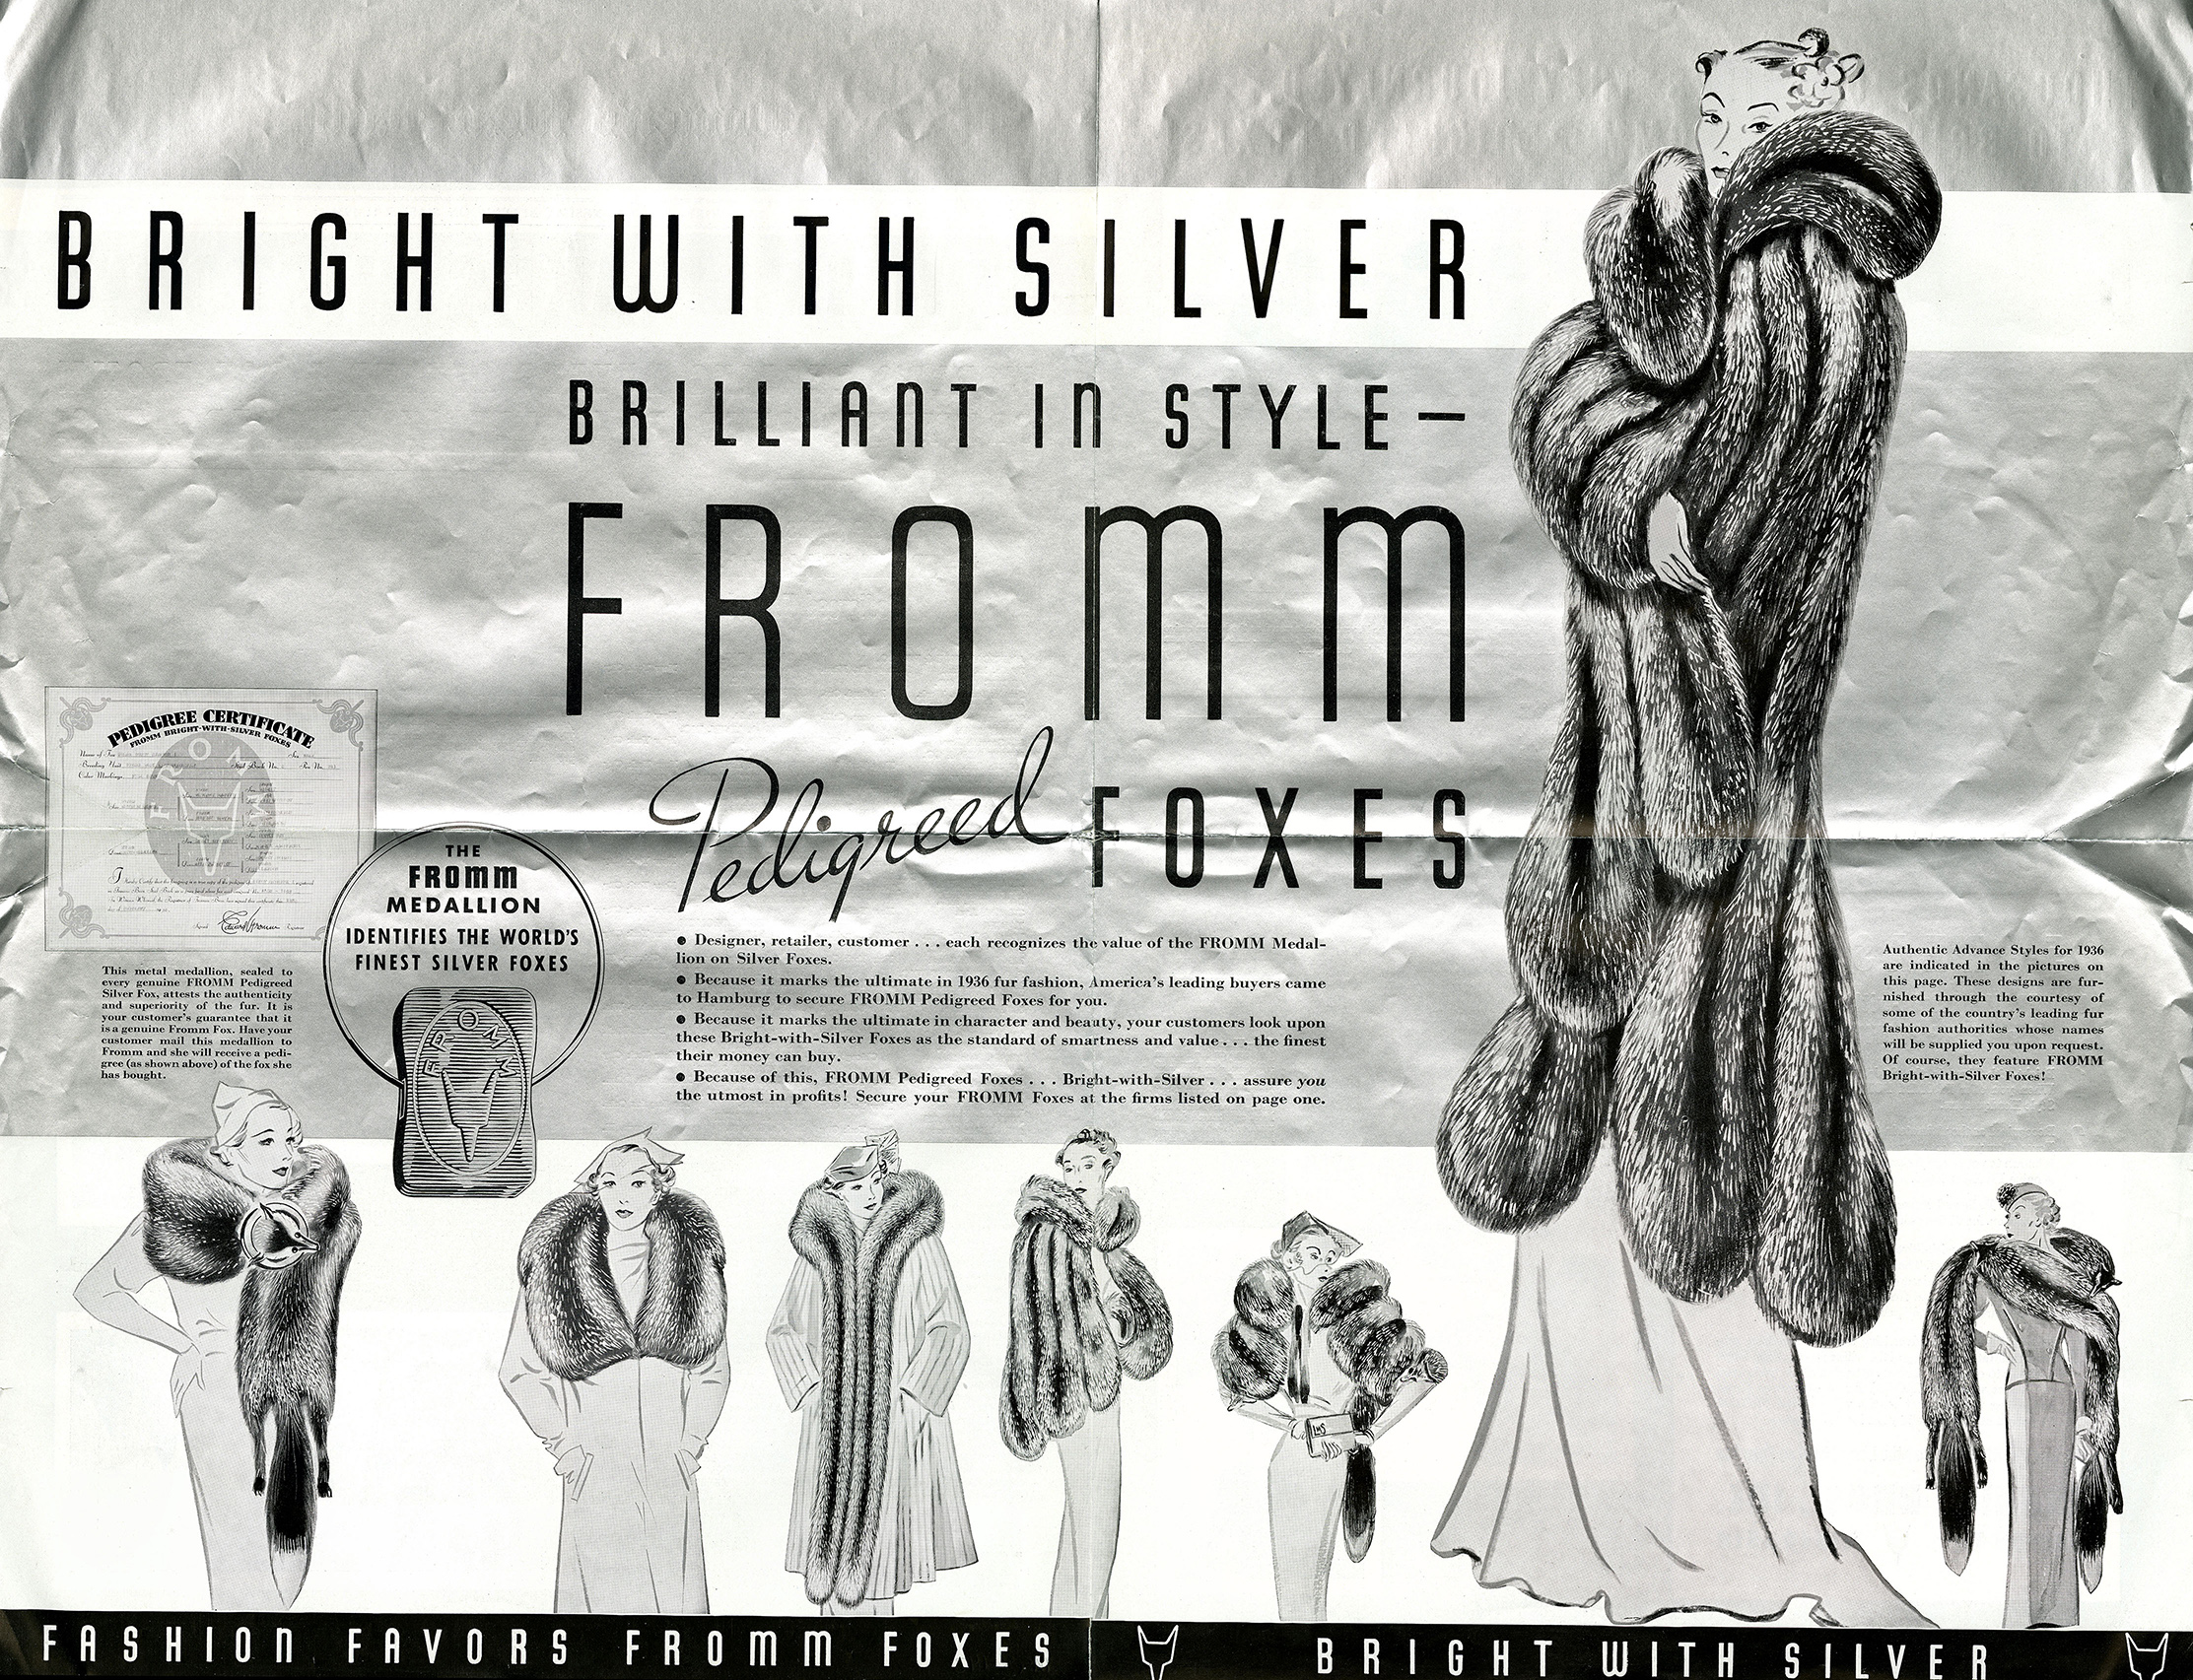 An advertisement for Fromm furs using their “bright with silver” slogan and printed on metallic silver paper, Women’s Wear Daily, March 11, 1936.